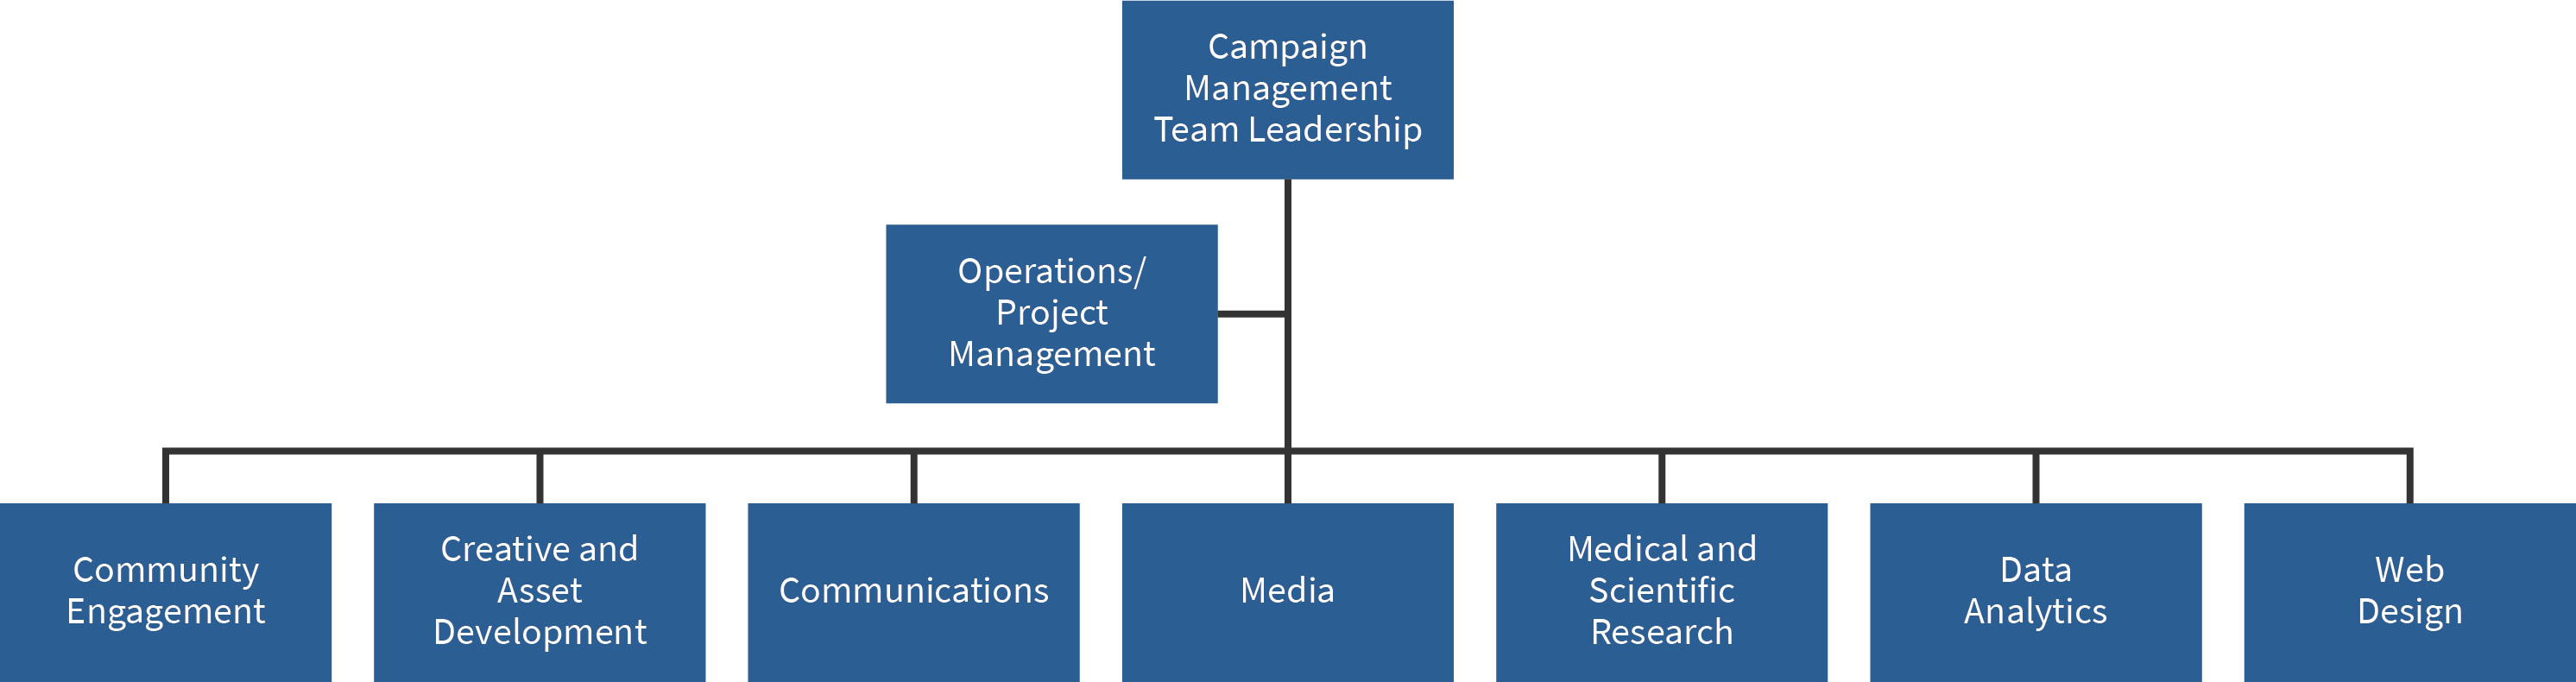 Example Campaign Management Team Organizational Structure